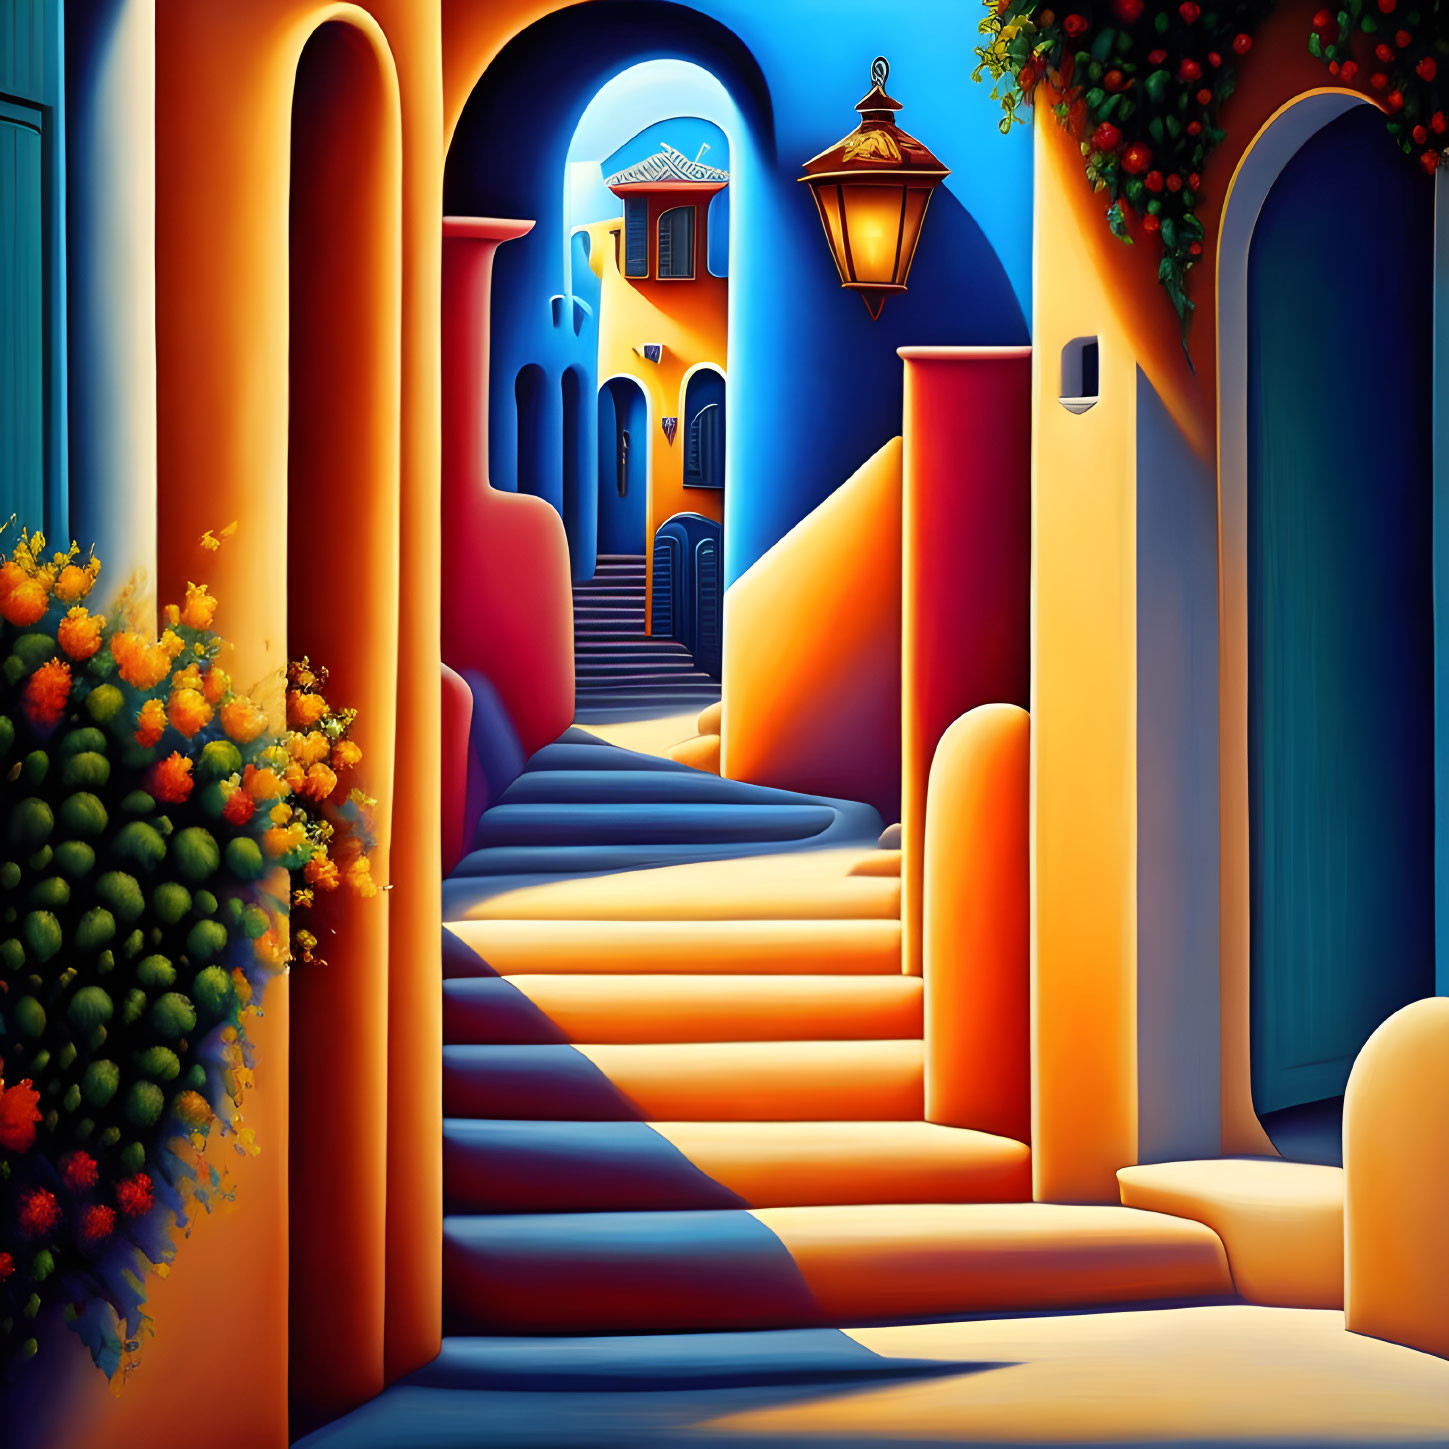 Colorful Mediterranean Alleyway with Blue and Orange Walls, Archways, Staircases, Lantern,